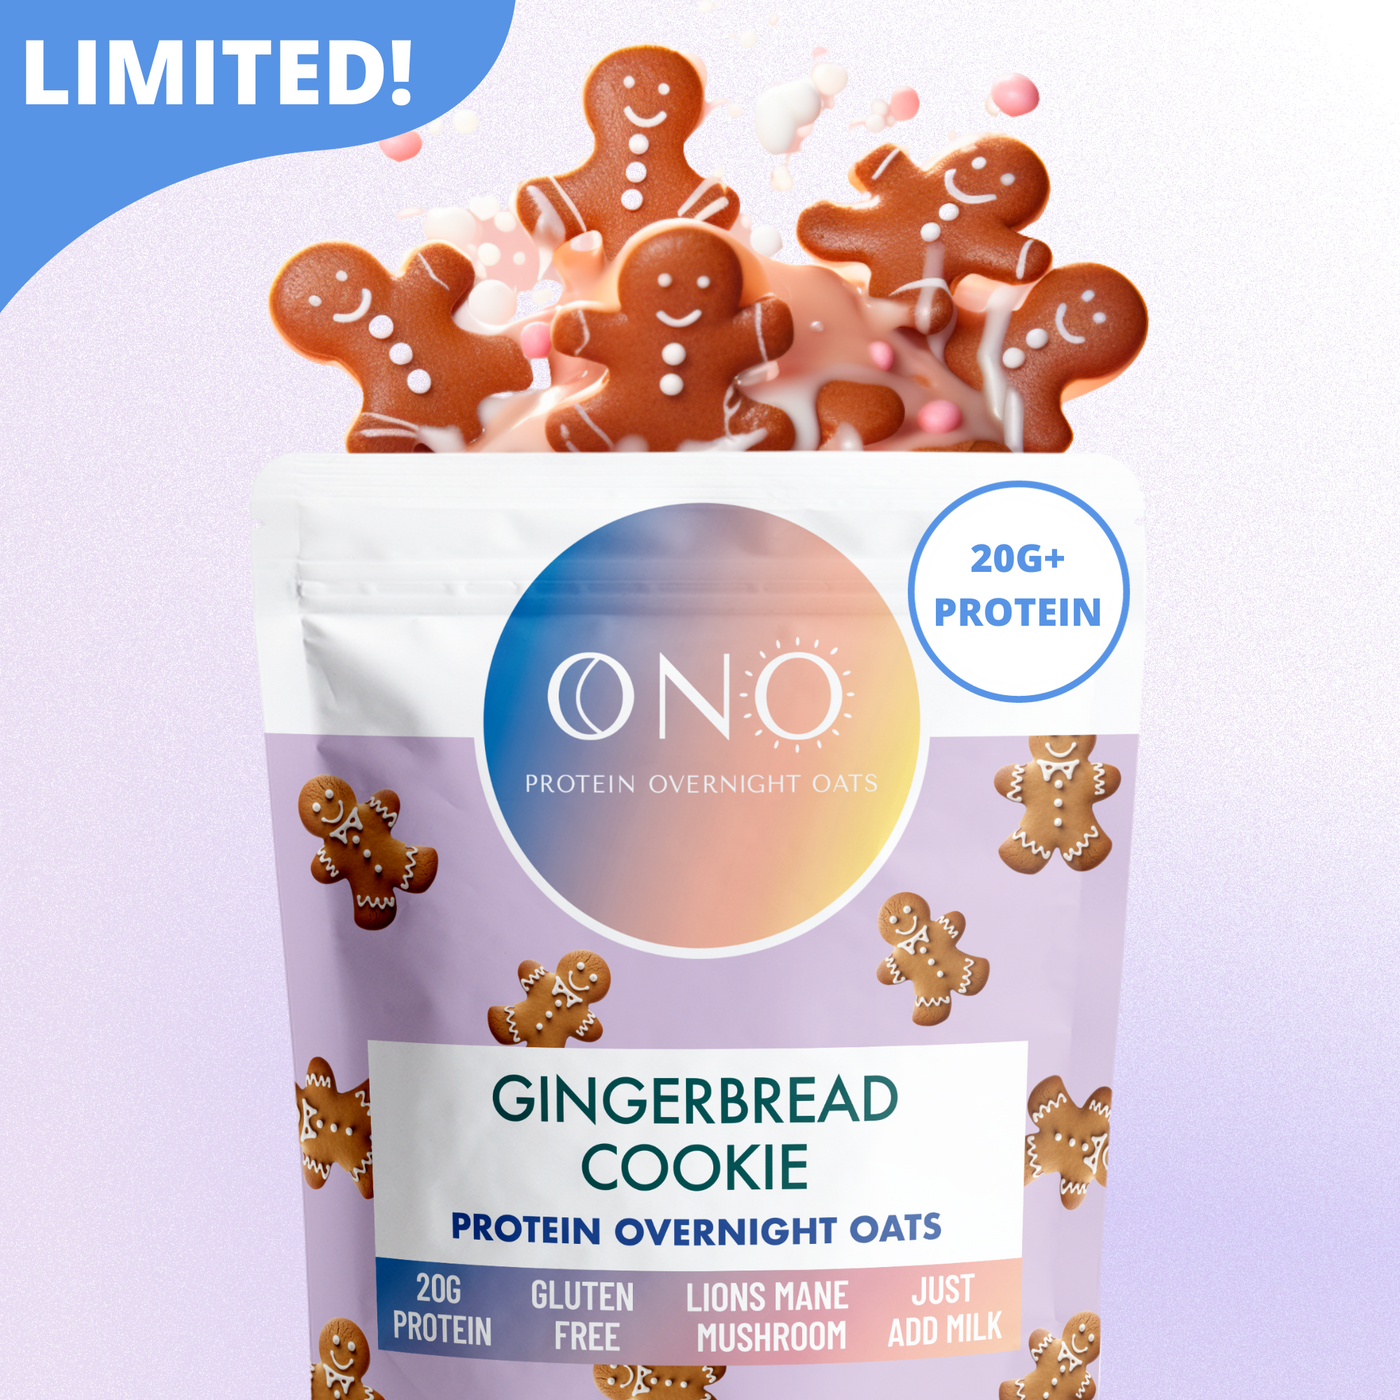 LIMITED Gingerbread Cookie (Amazon Only)